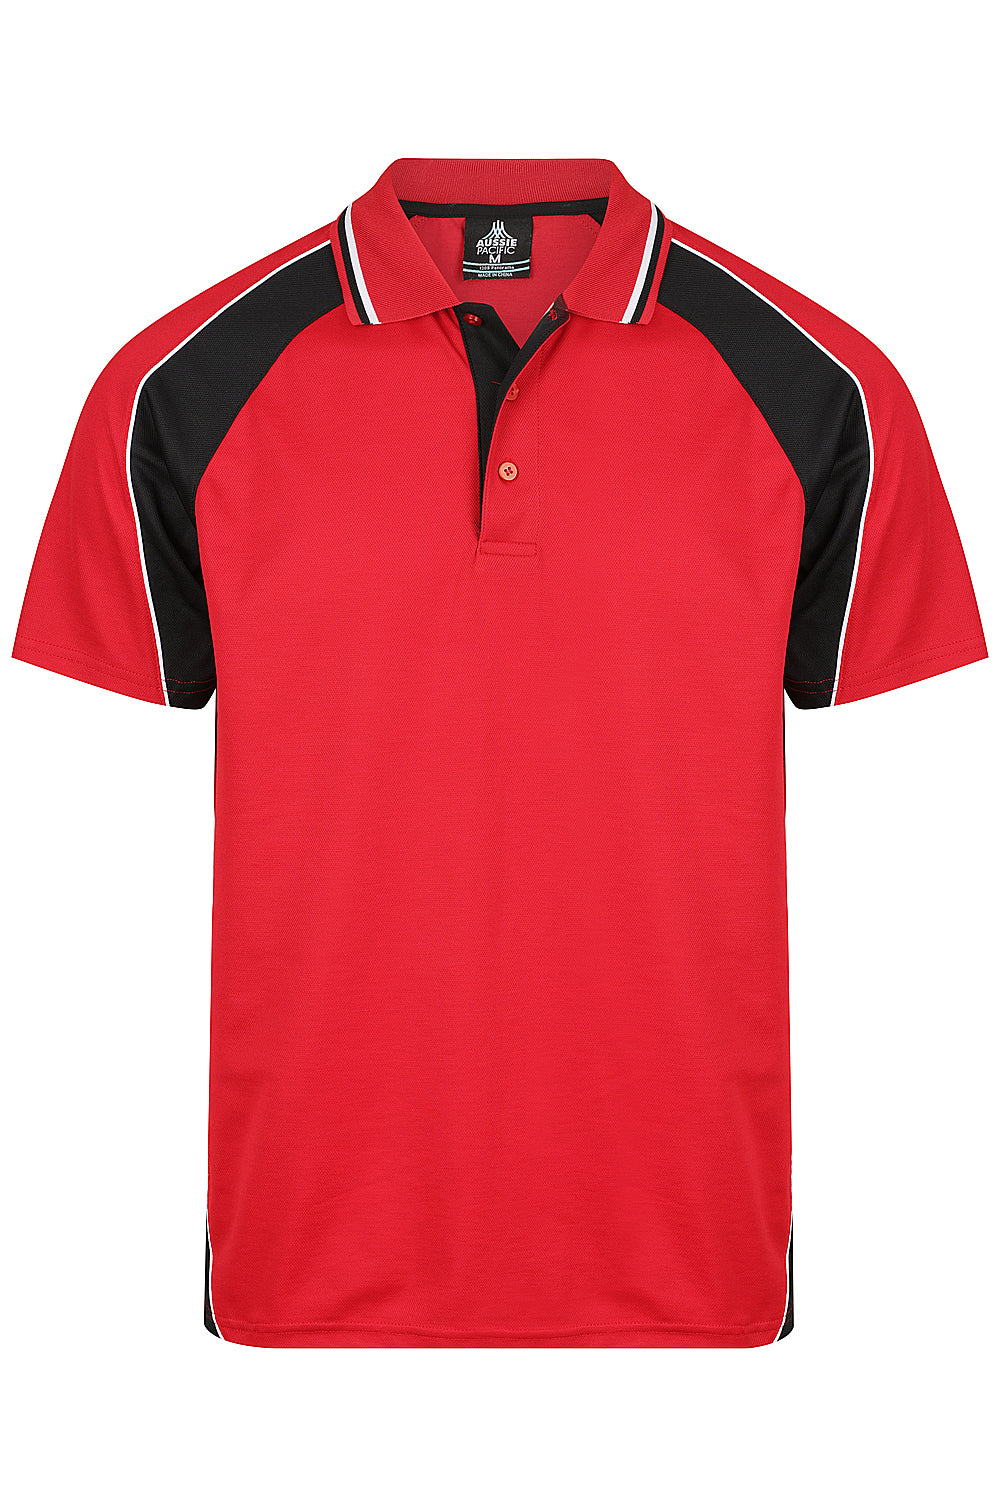 PANORAMA MENS POLOS RUNOUT - 1309-Aussie Pacific-63